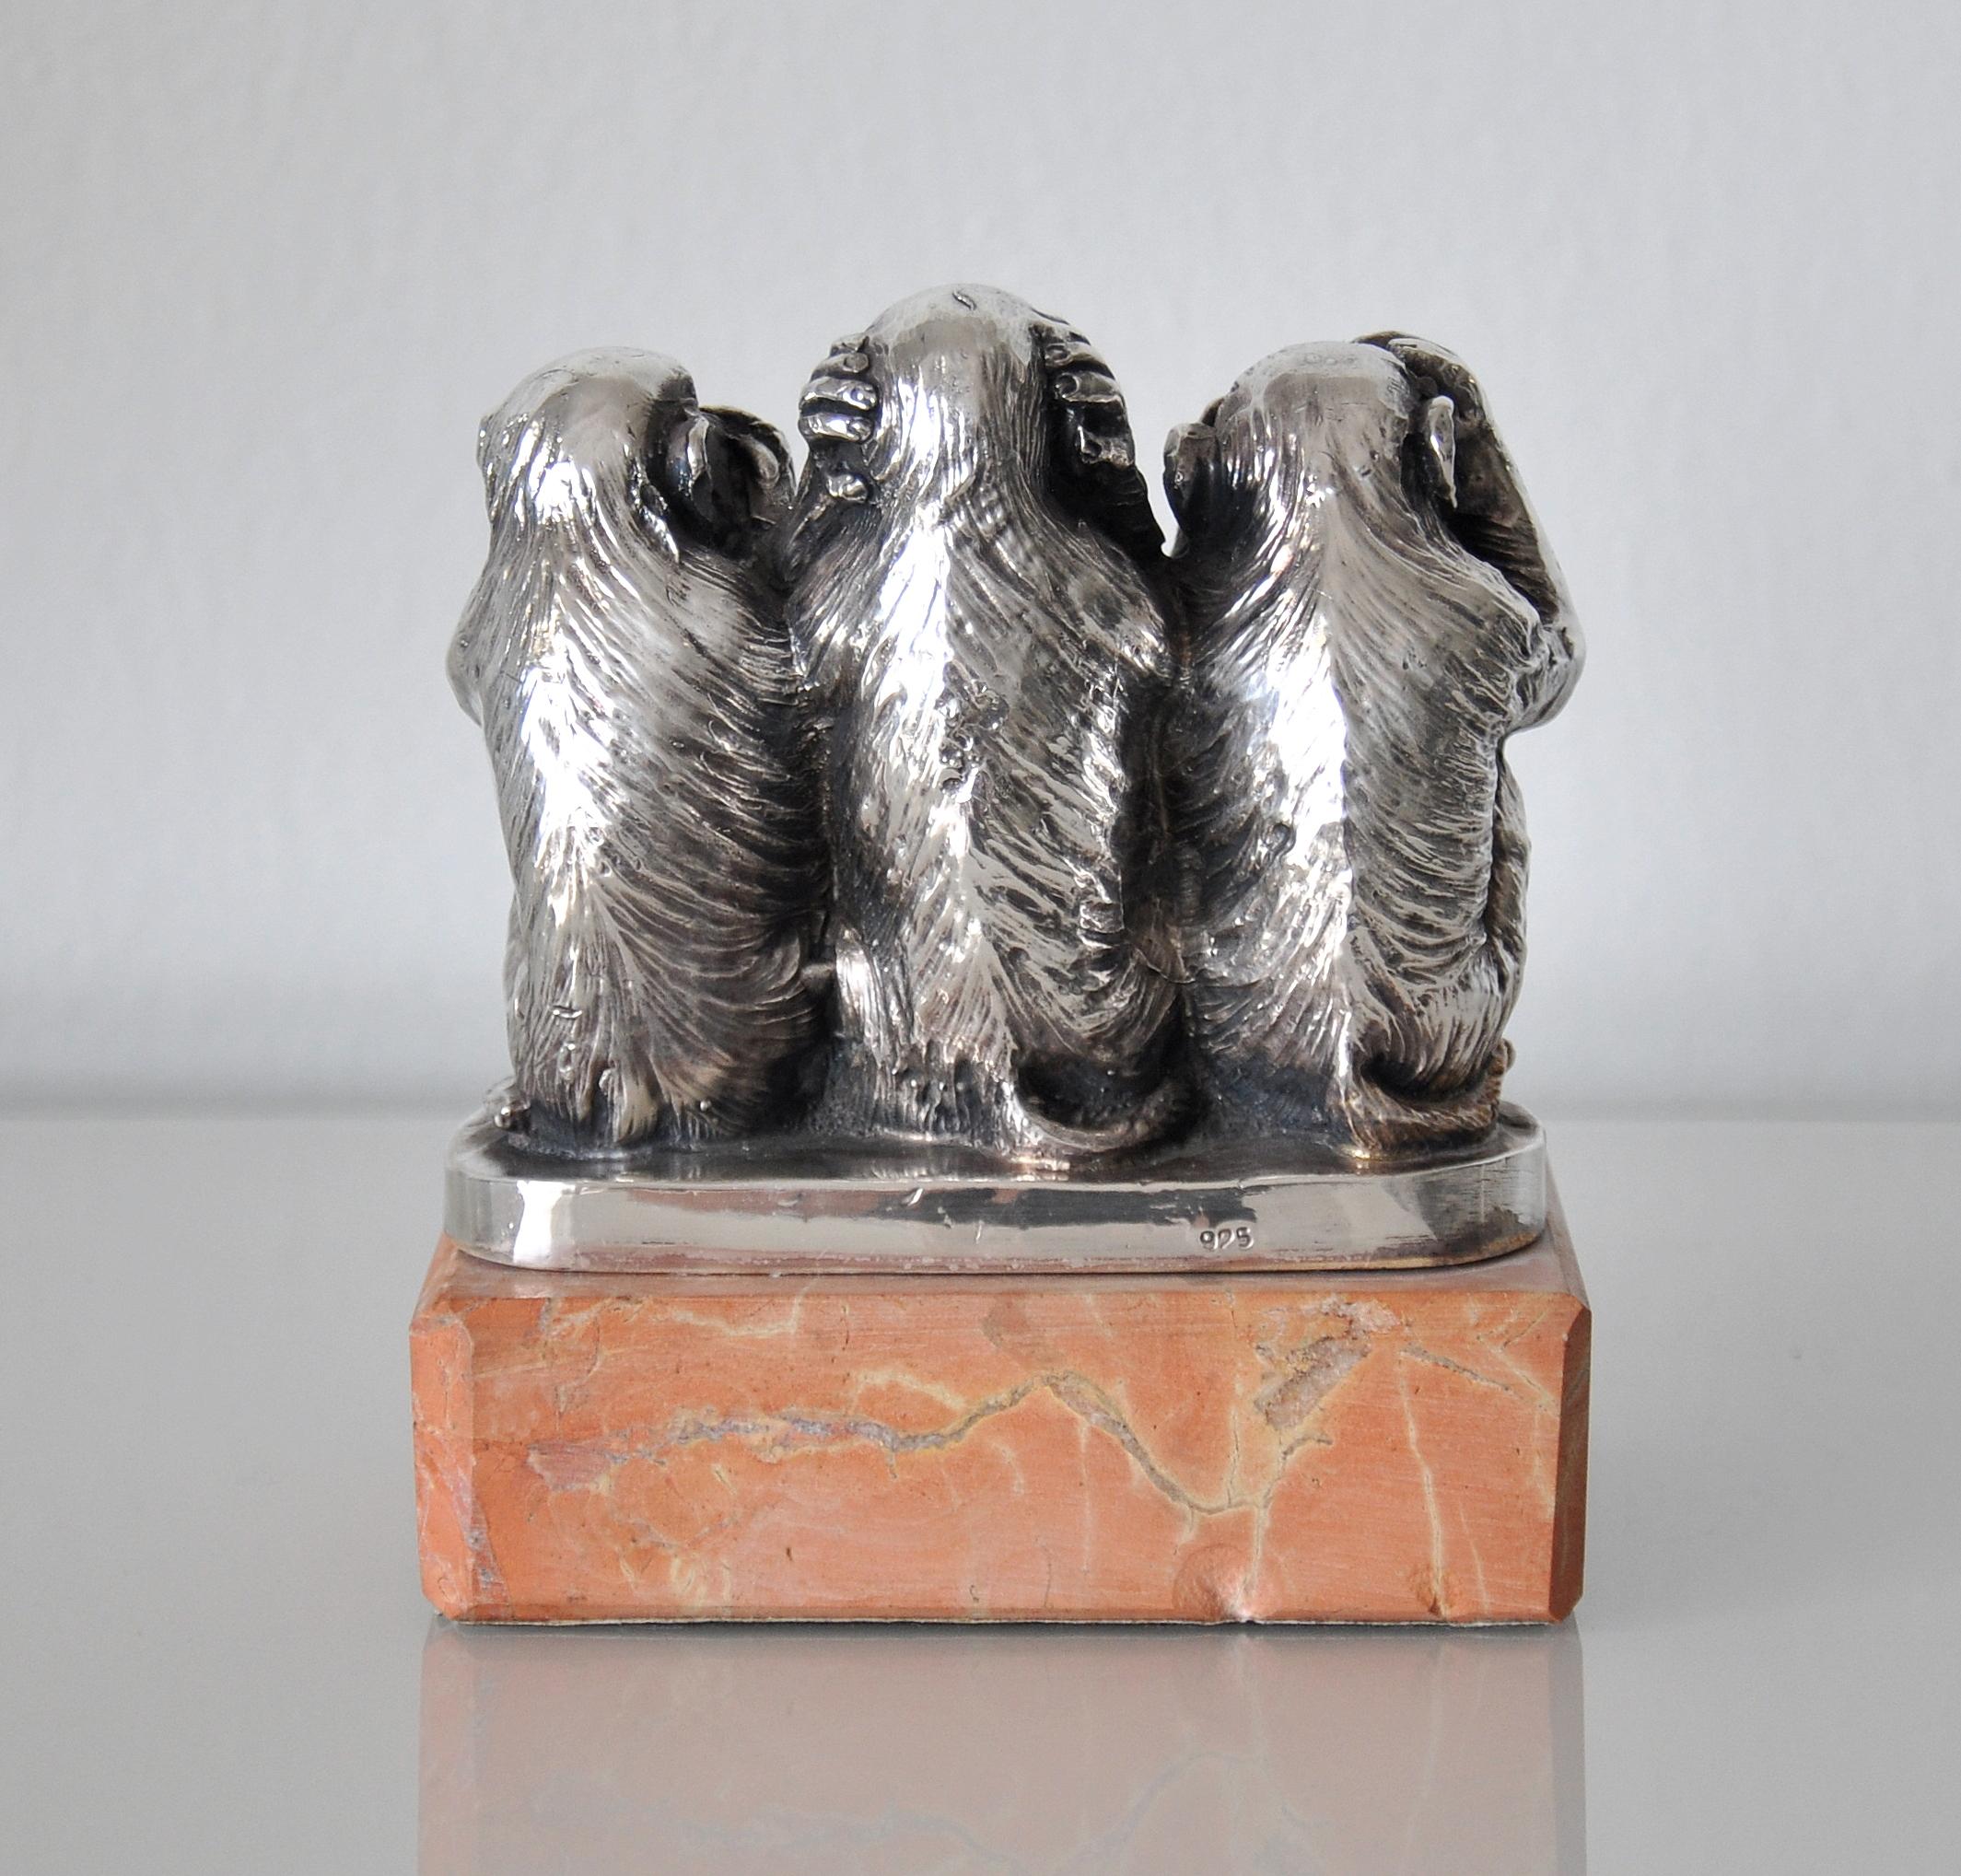 Early 20th Century Silver and Marble Three Wise Monkeys Sculpture